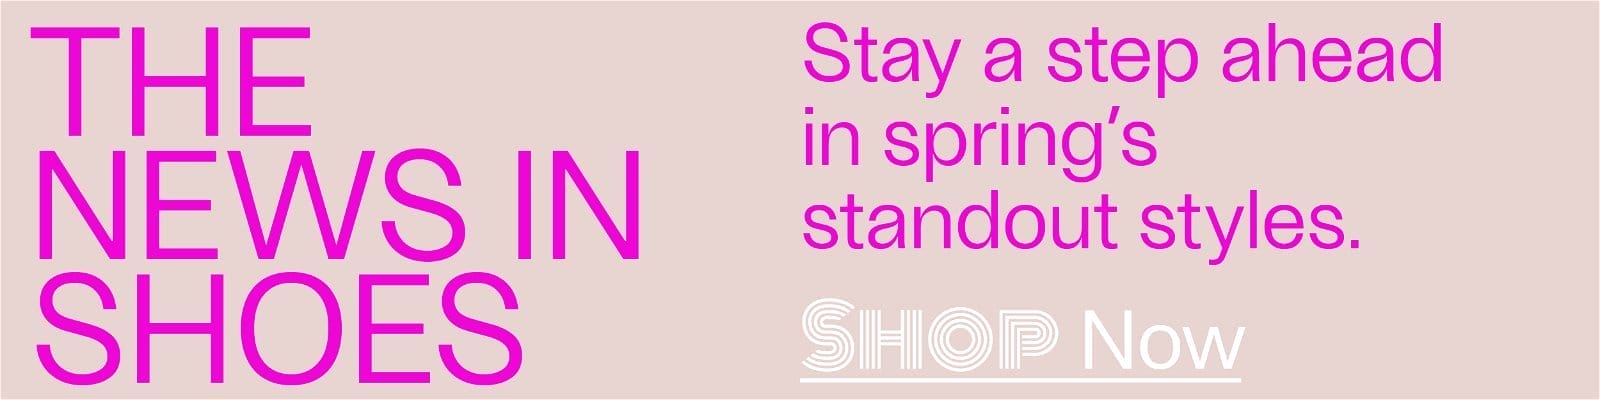 The News In Shoes - Stay a step ahead in Spring's standout styles. - Shop Now